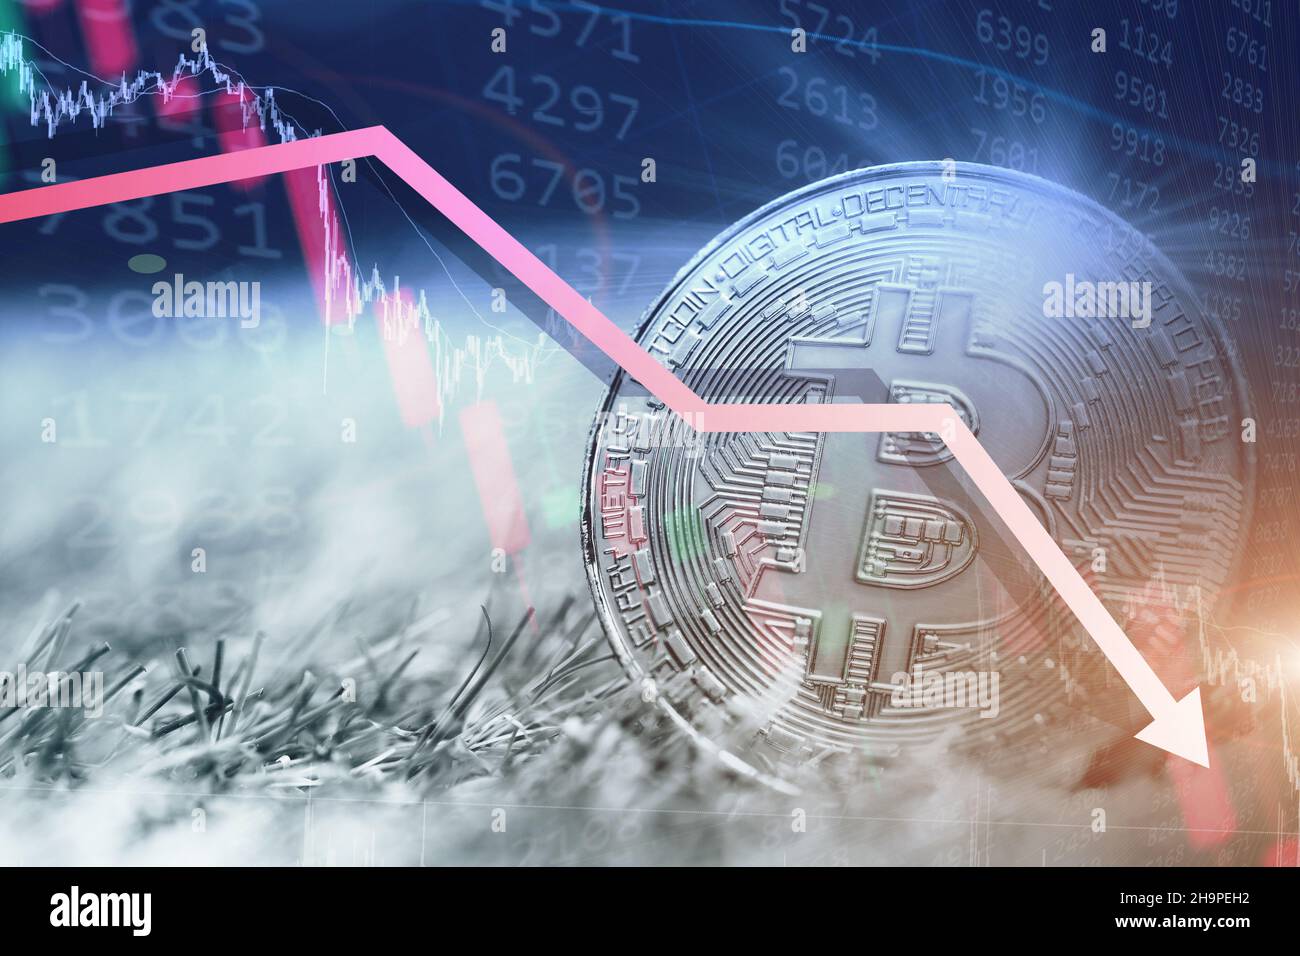 Bitcoin or Cryptocurrency down price breaking new low drop value market crash graphic concept Stock Photo